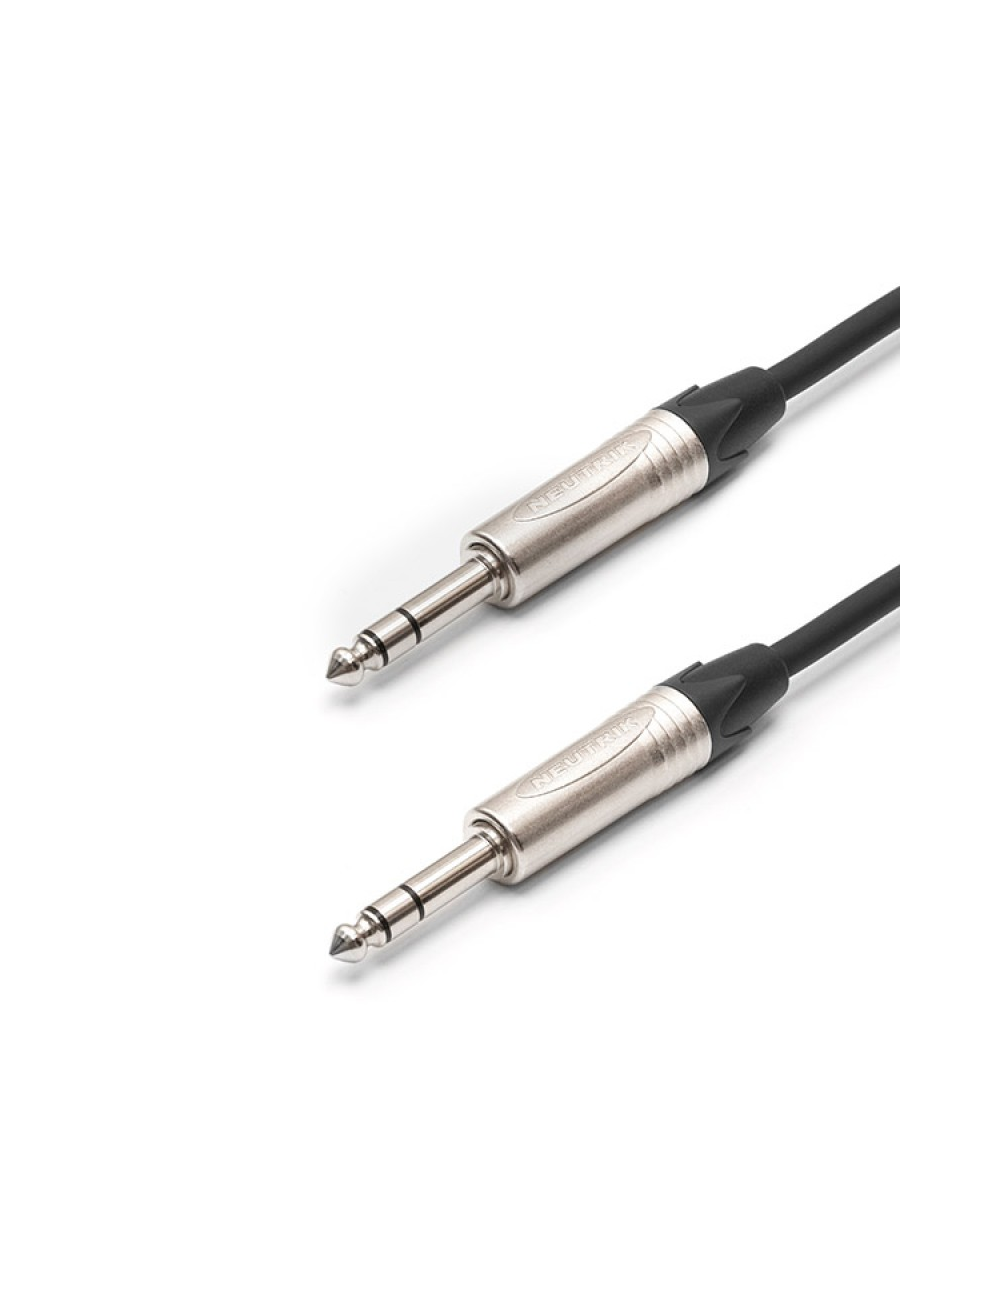 Micro cable with Jack 6,35 Stereo Male / Neutrik Male, lg 20m